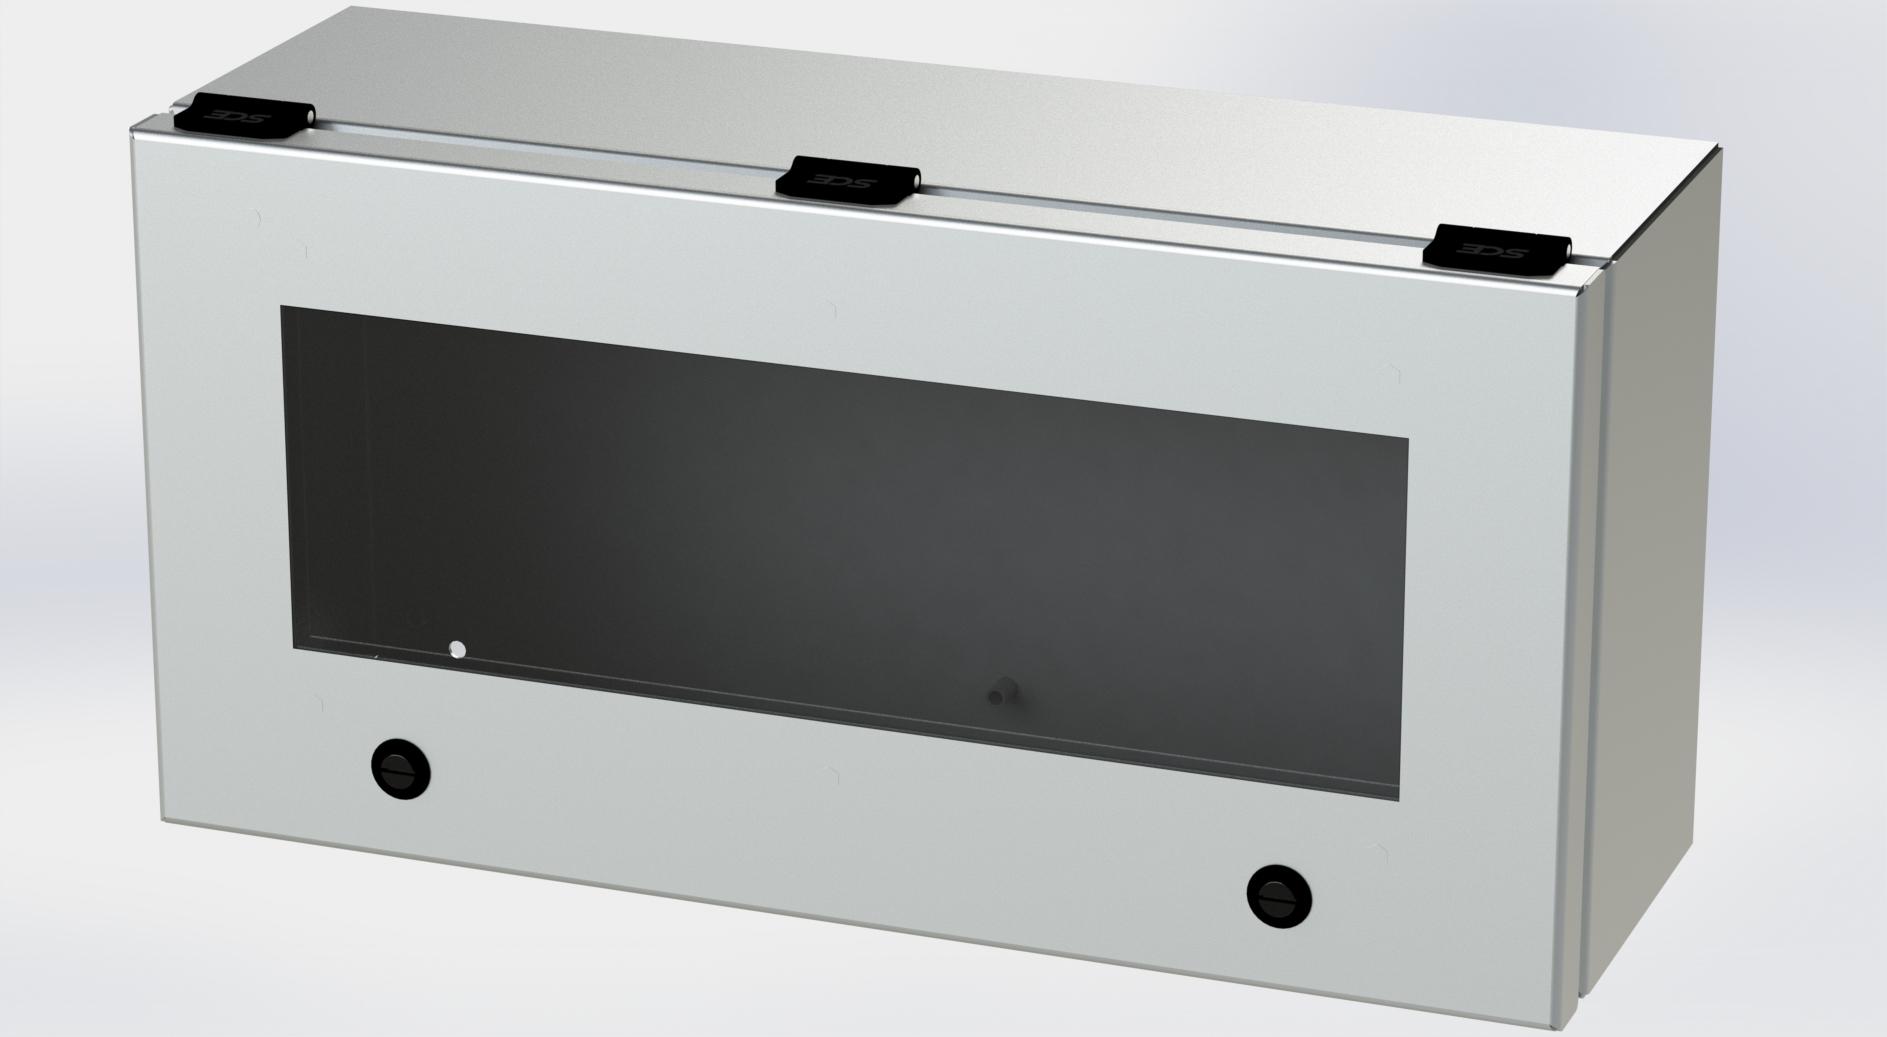 Saginaw Control SCE-L9186ELJWSS S.S. ELJ Trough Window Enclosure, Height:9.00", Width:18.00", Depth:6.00", #4 brushed finish on all exterior surfaces. Optional sub-panels are powder coated white.